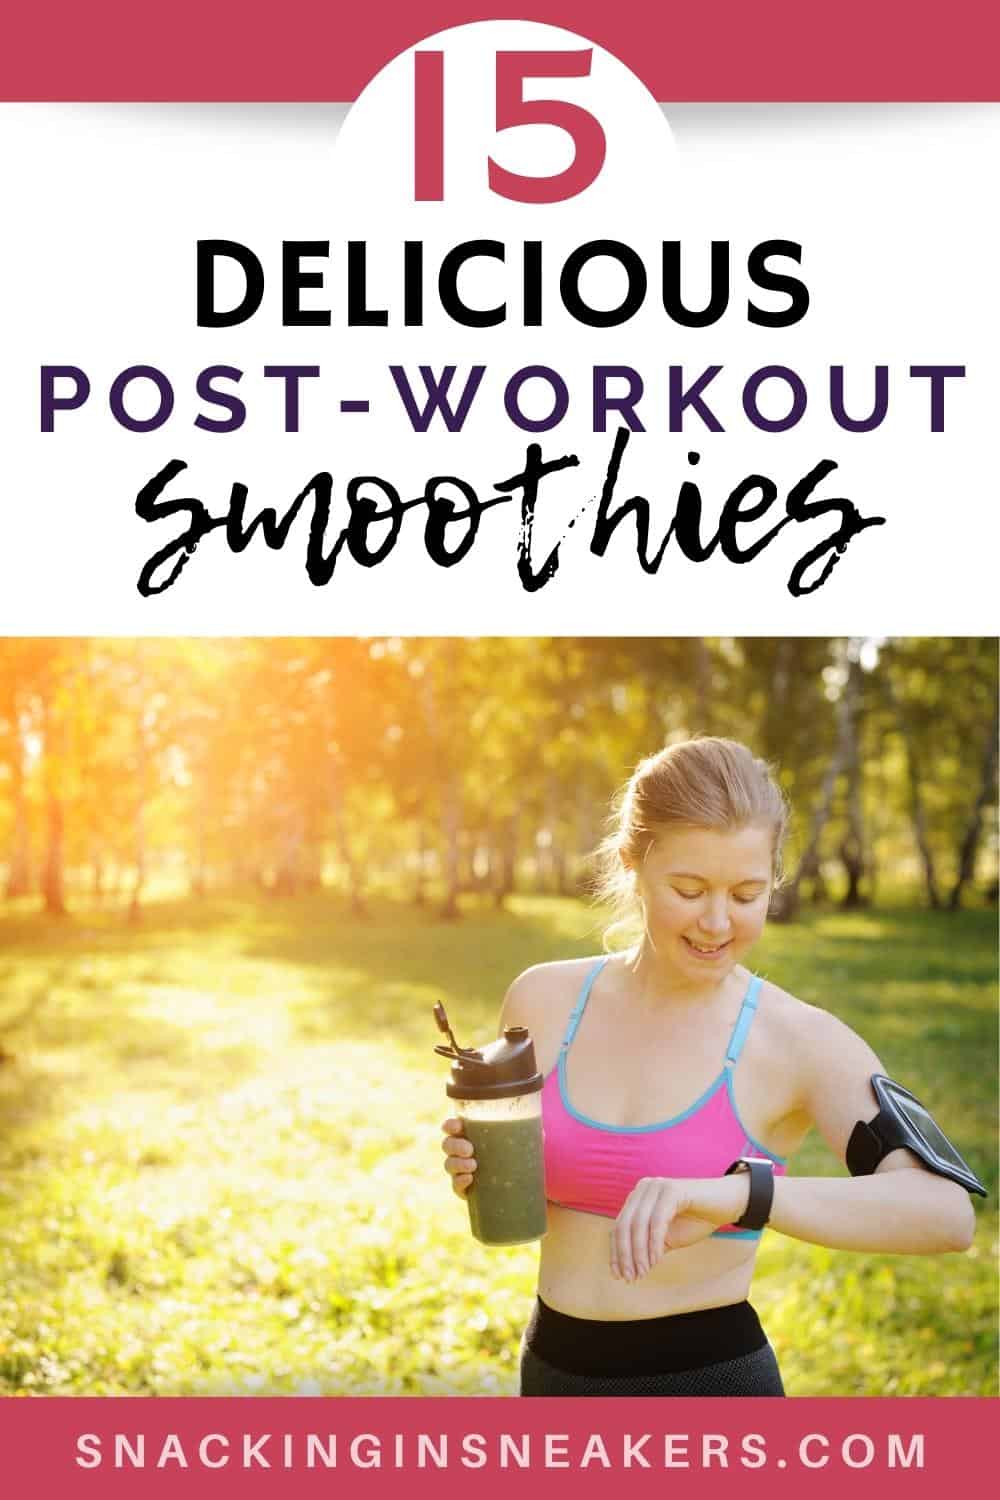 The Best Healthy Post Workout Smoothie Recipe for Weight Loss - SHEFIT